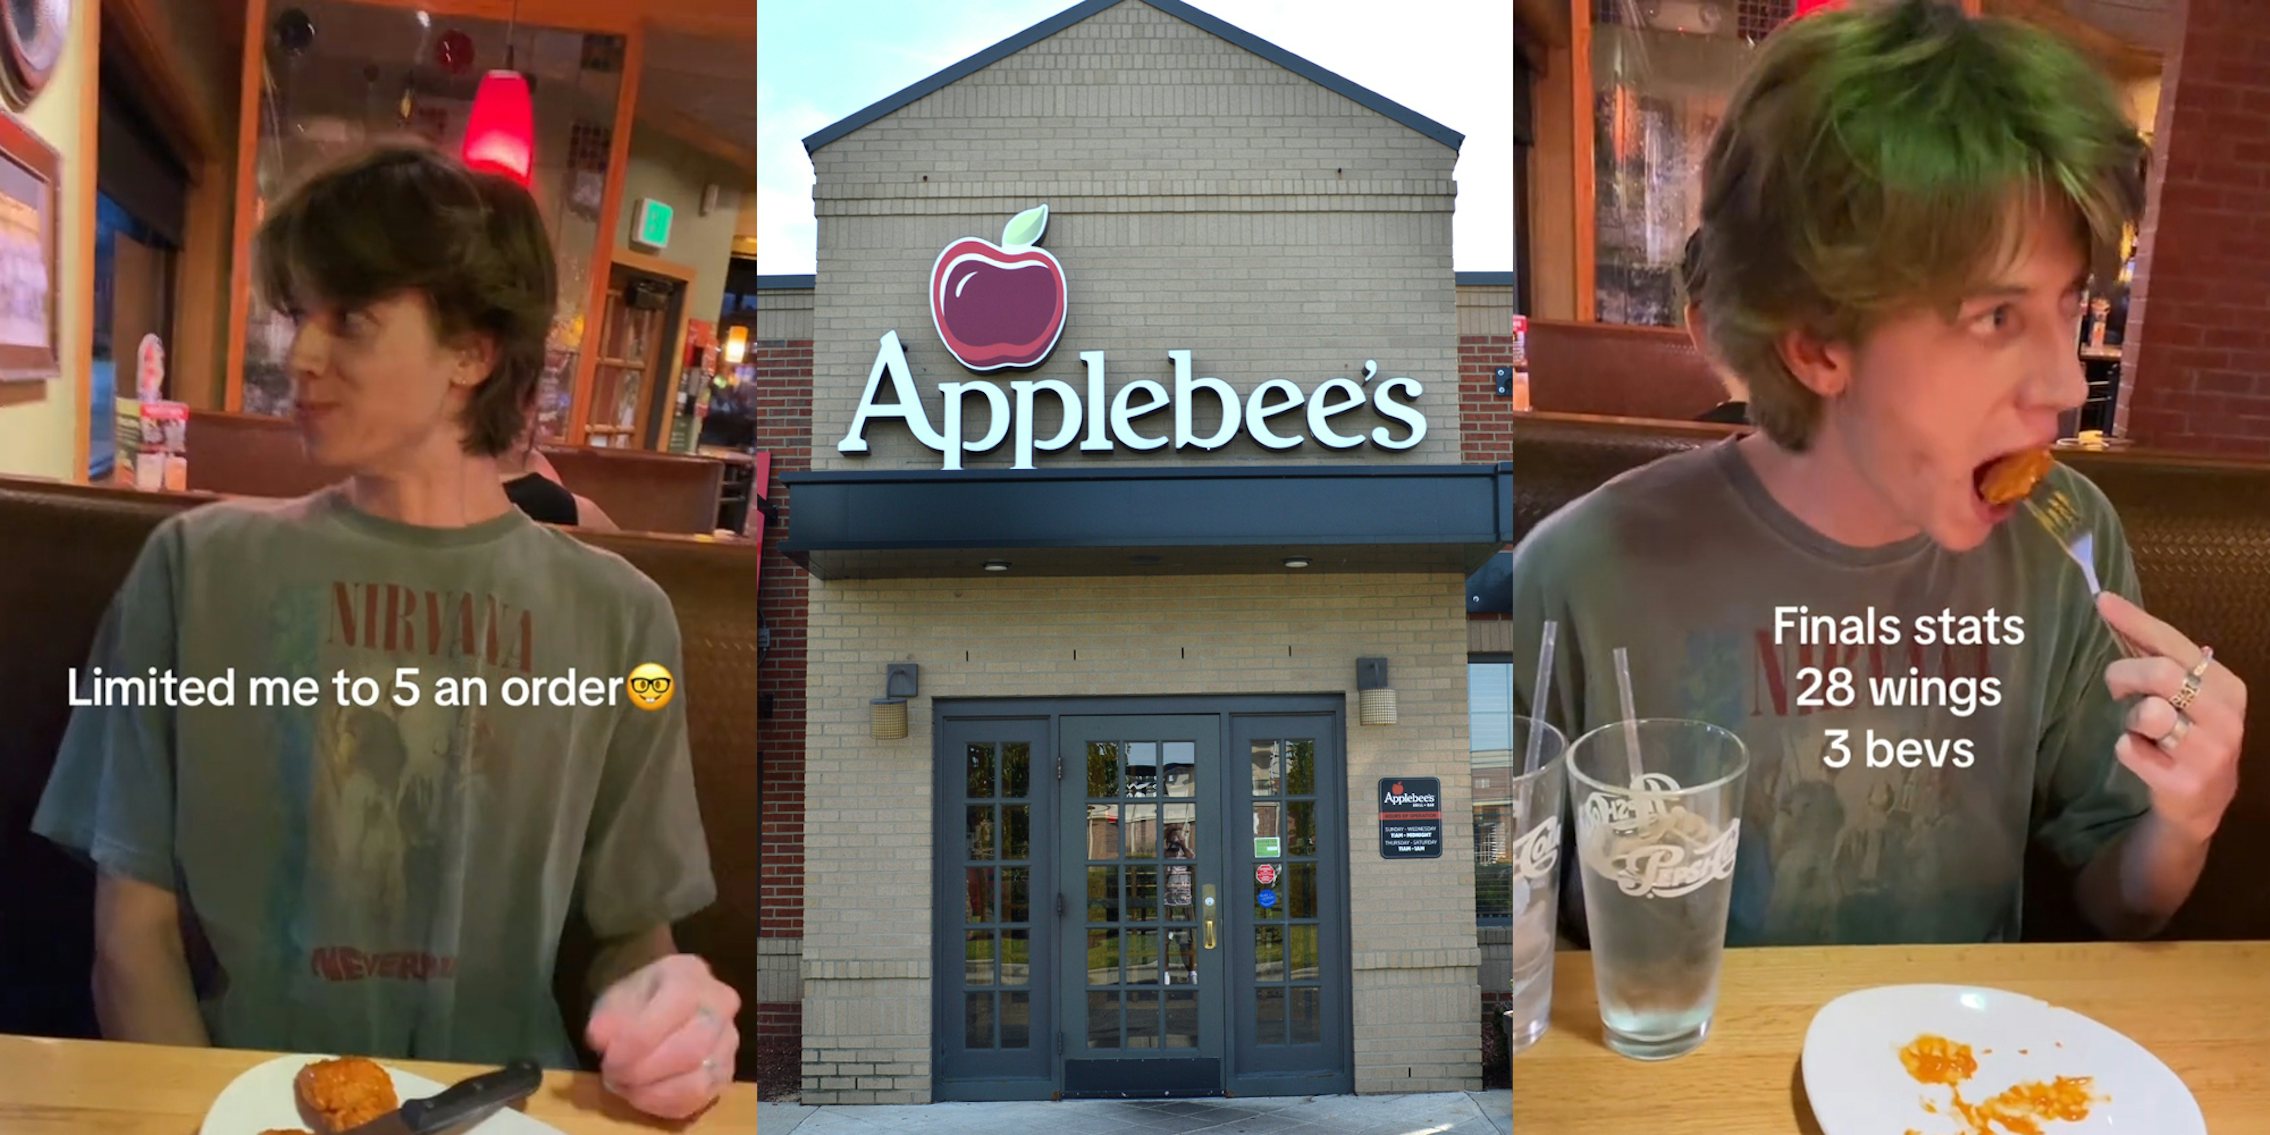 Applebee's customer eating wings with caption 'Limited me to 5 an order' (l) Applebee's building with sign (c) Applebee's customer eating wings with caption 'Finals stats 28 wings 3 bevs' (r)